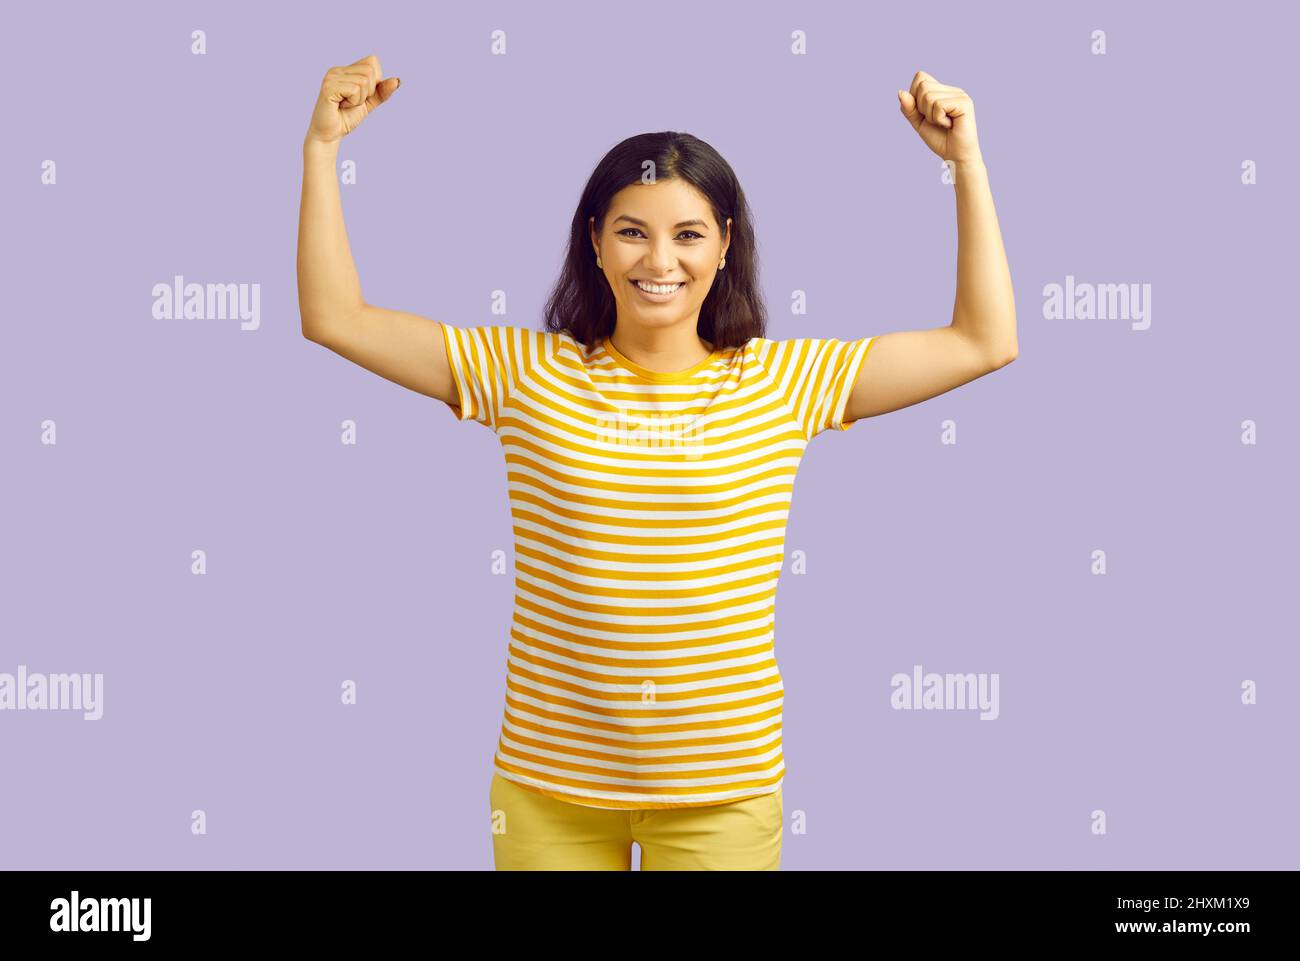 Cheerful funny woman demonstrates biceps muscles as sign of success and health on purple background. Stock Photo